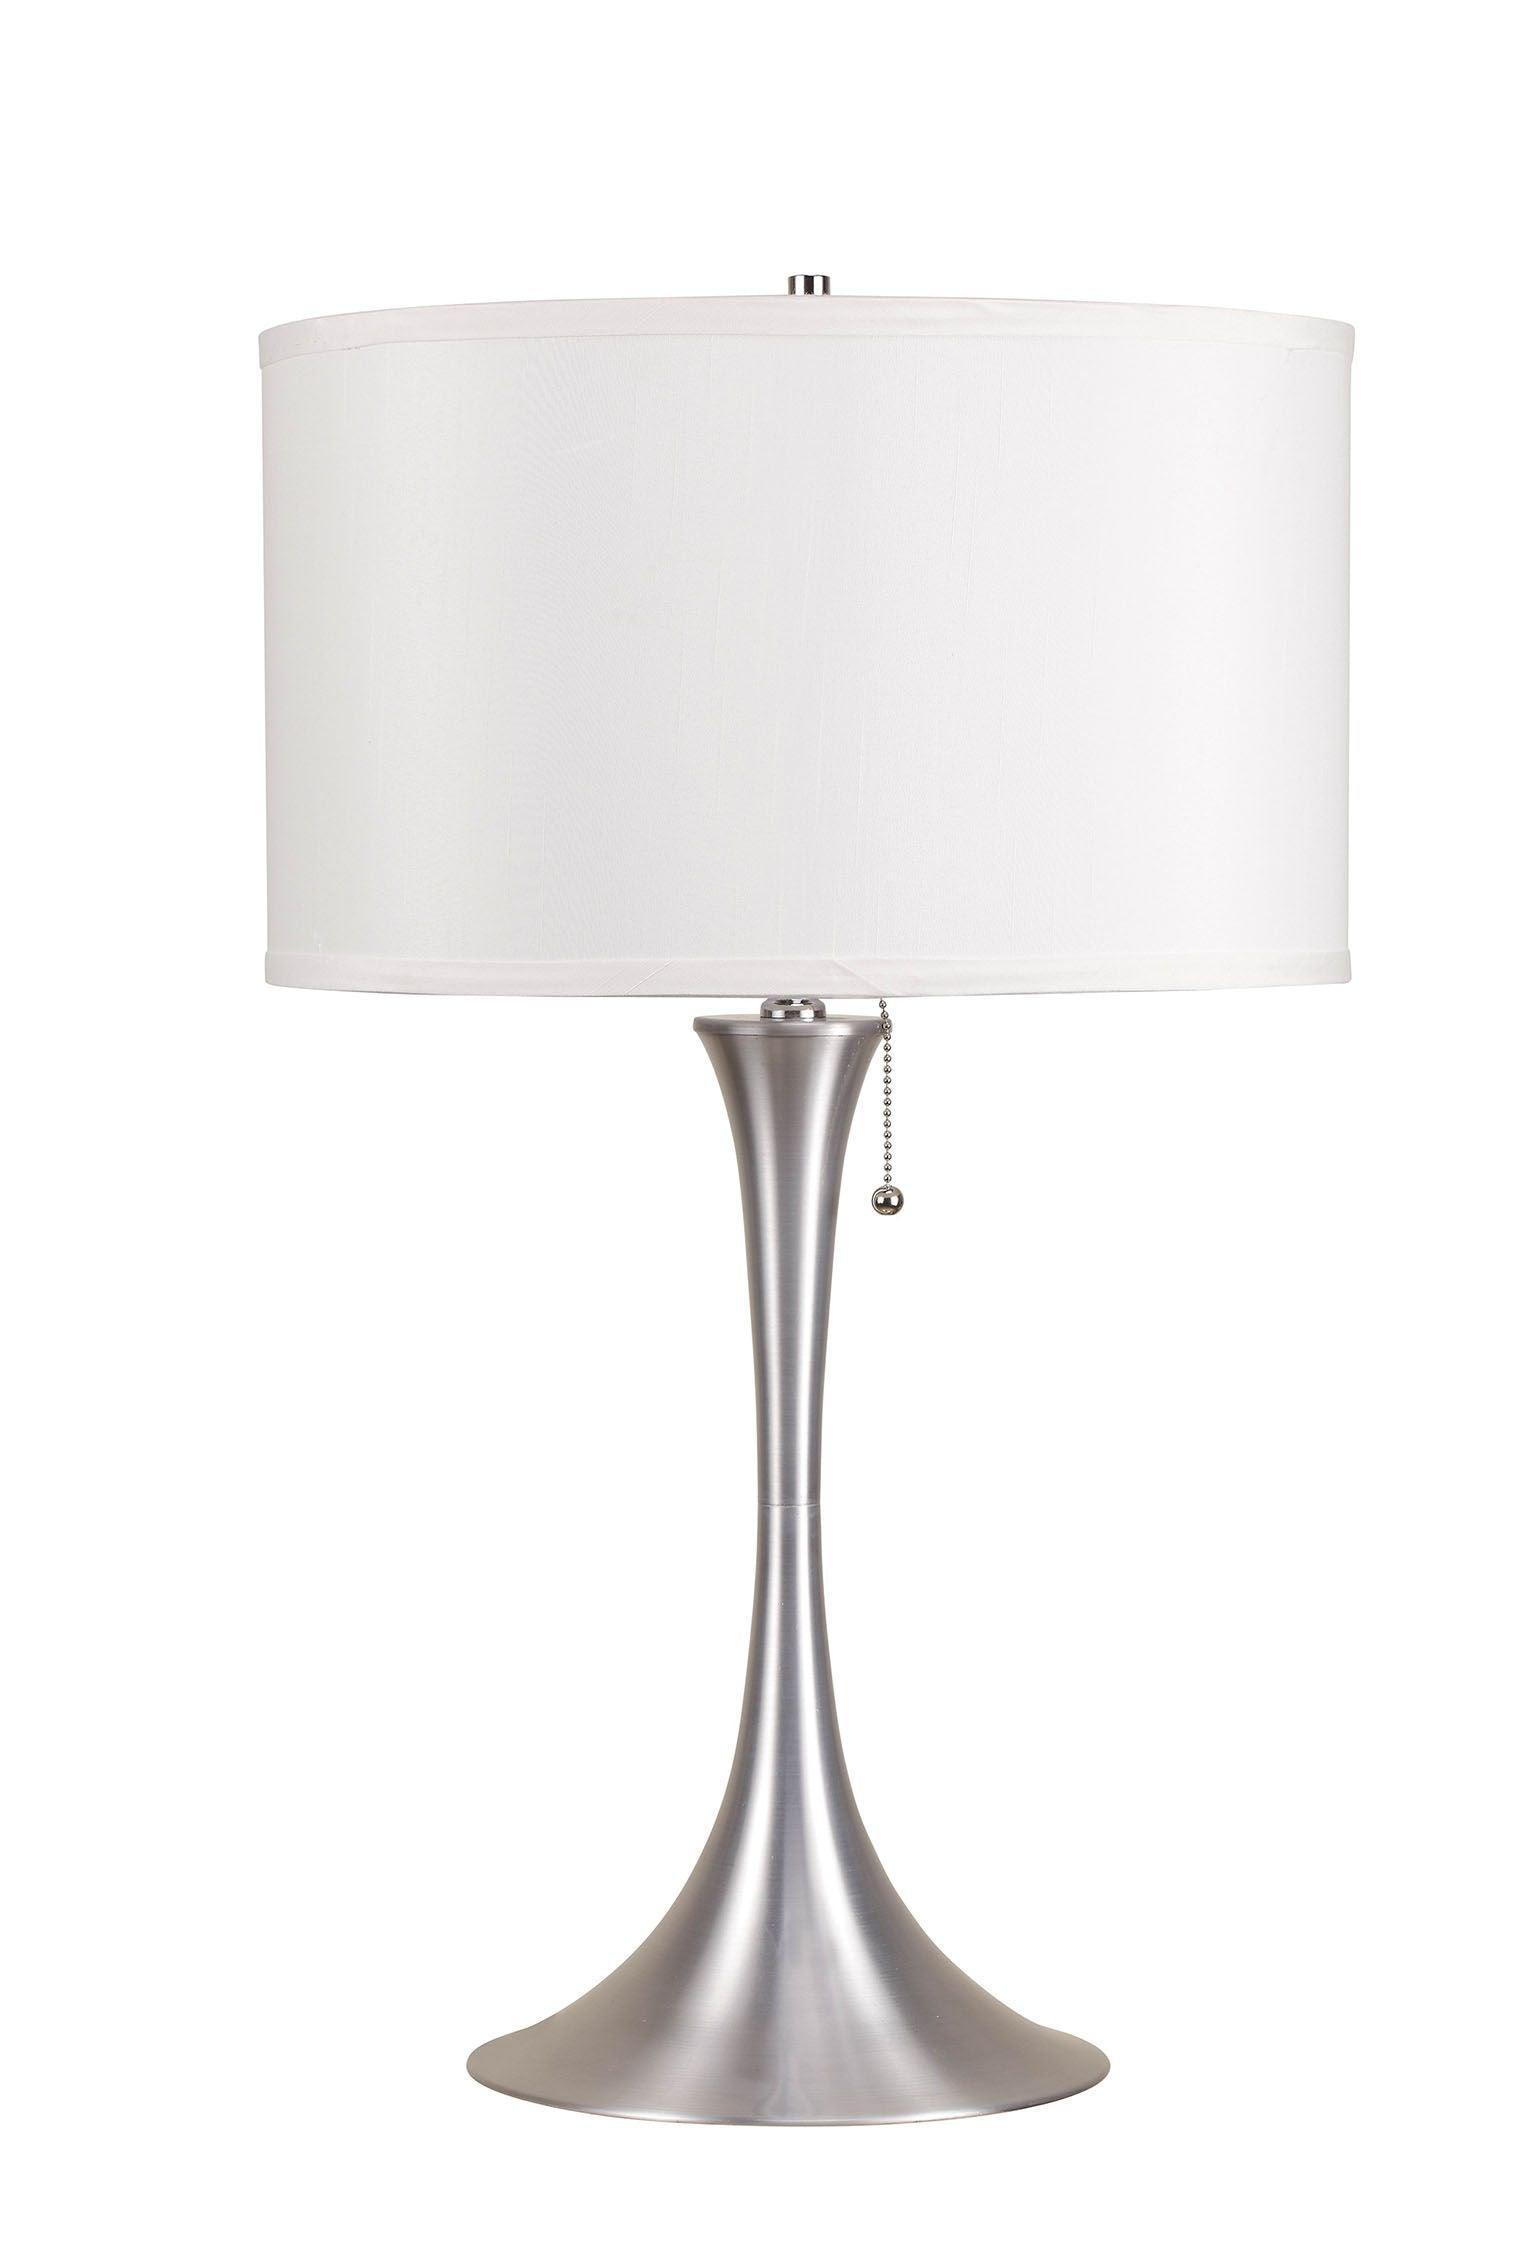 ACME - Cody - Table Lamp - Brushed Silver - 5th Avenue Furniture